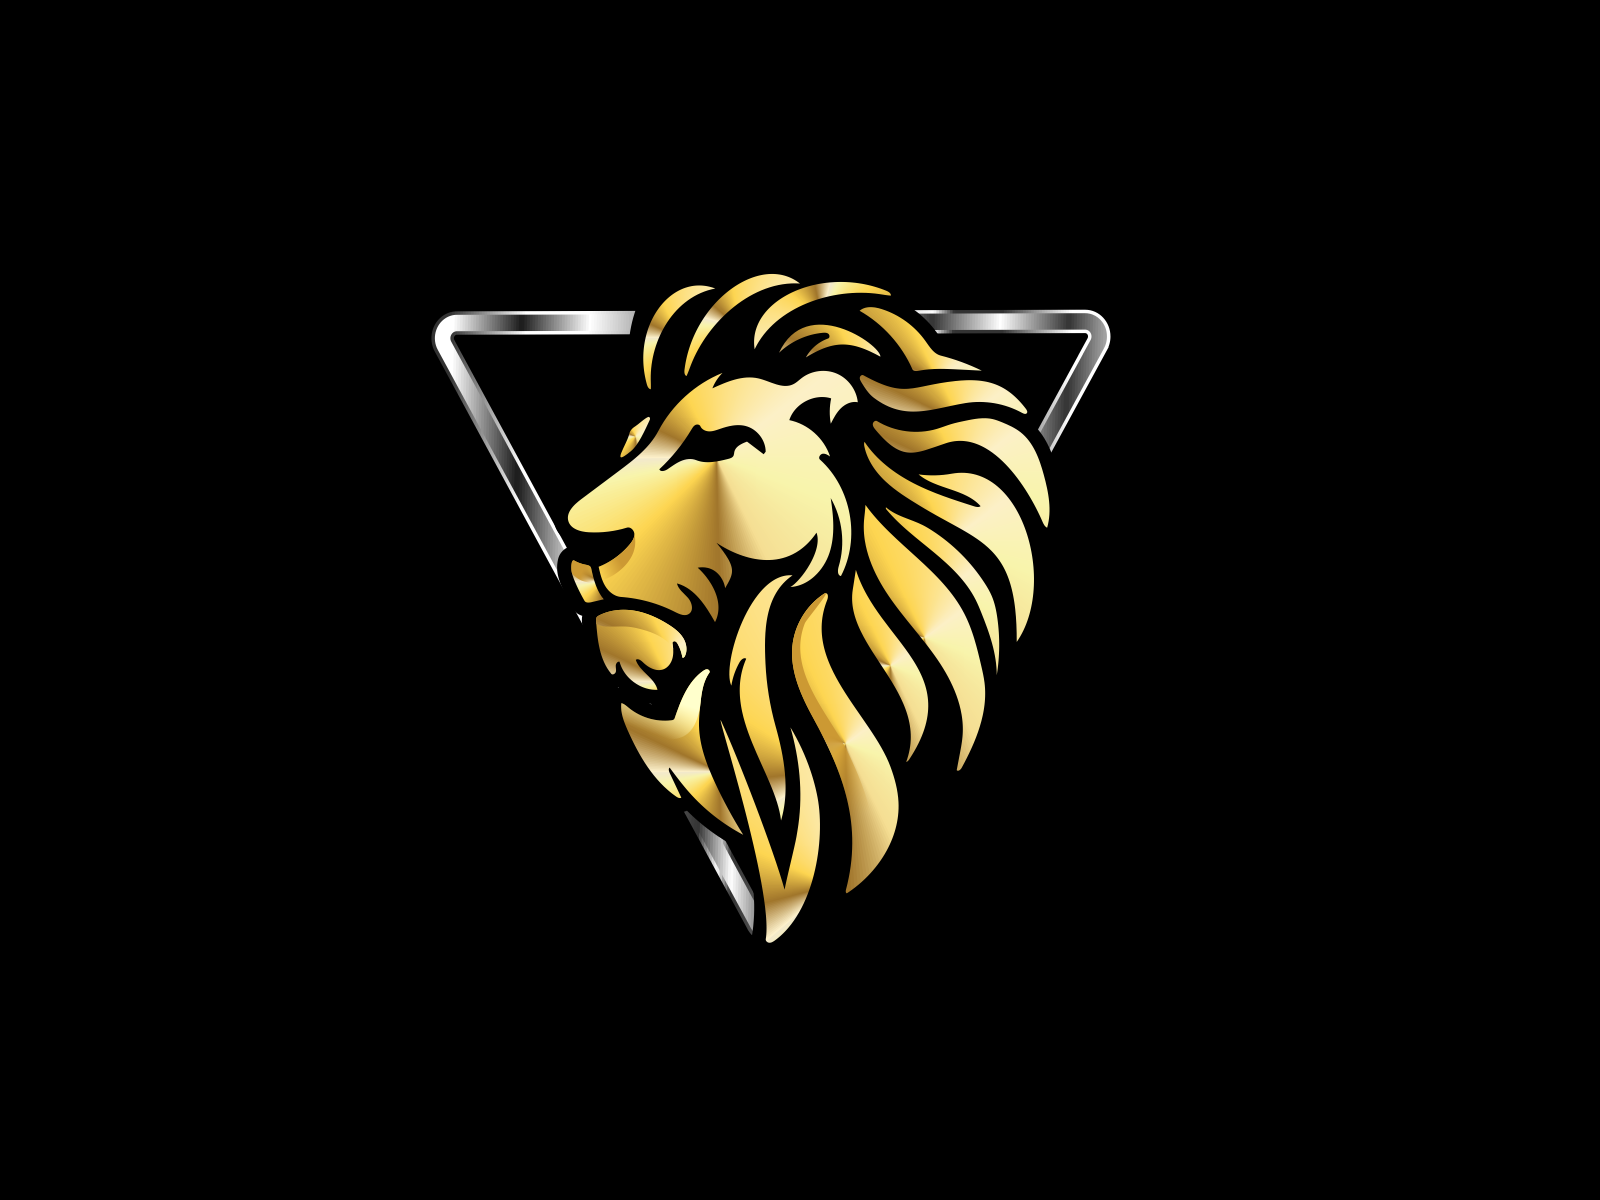 Gold lion logo template Royalty Free Vector Image